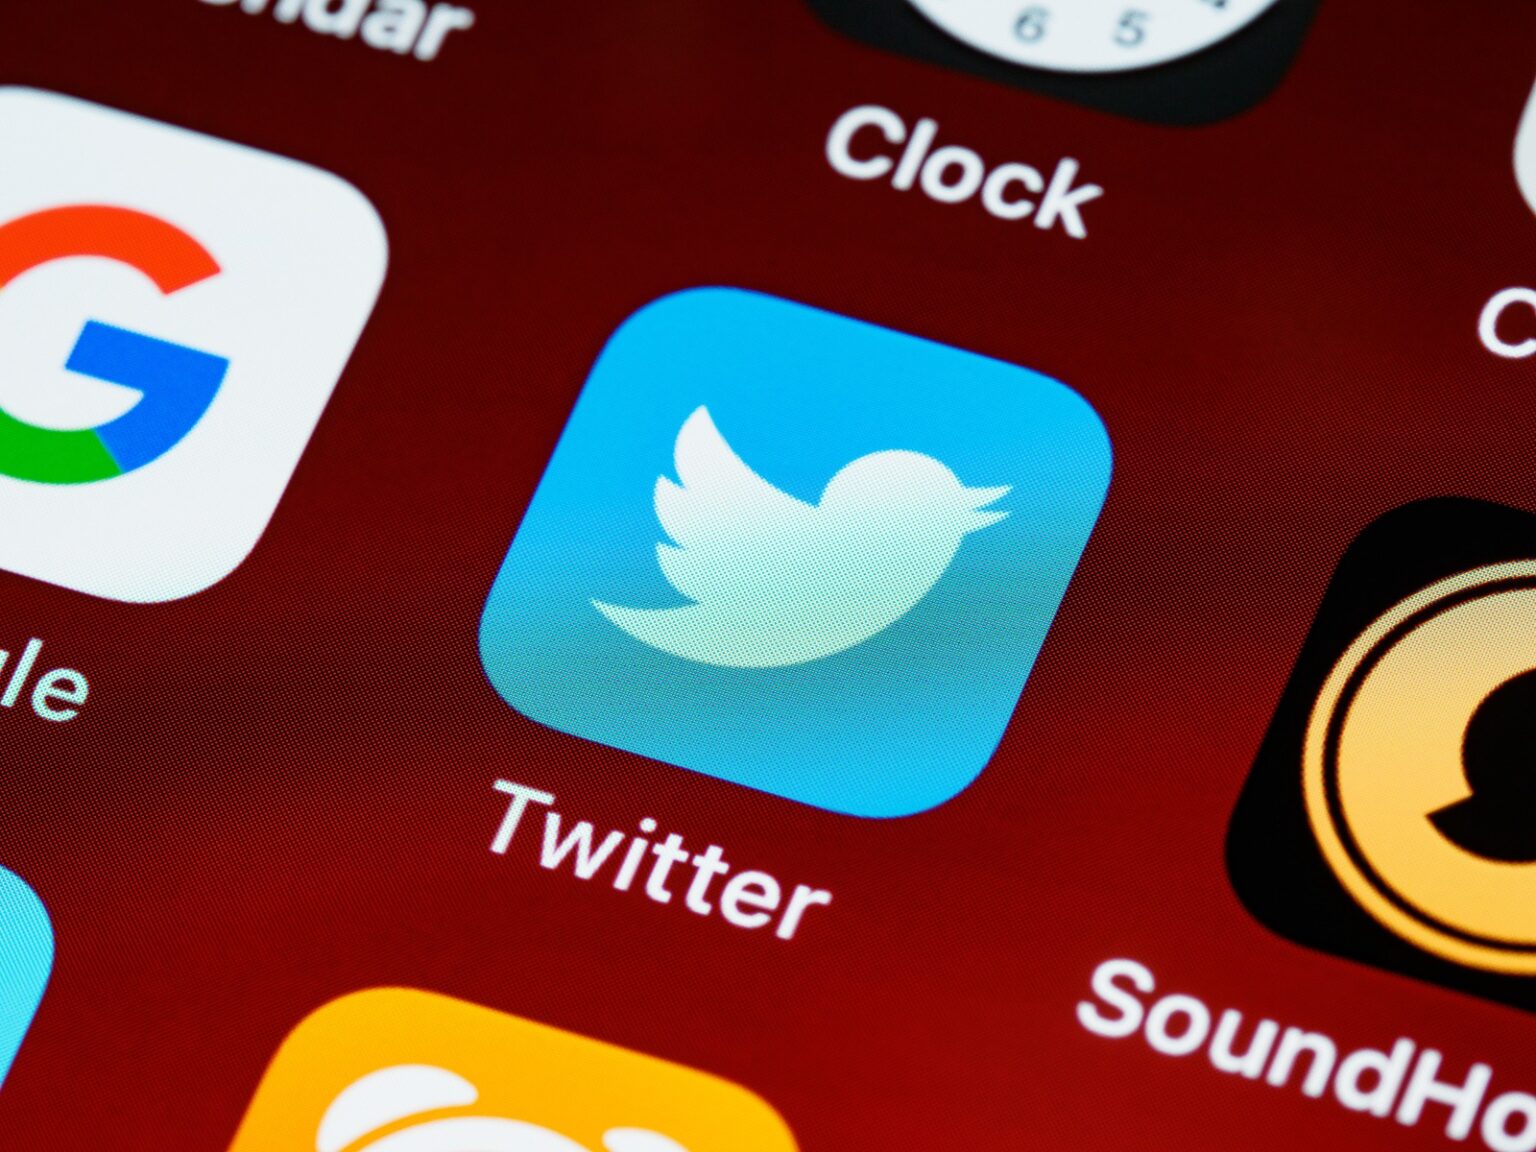 TWITTER TO LOSE 1.4 MILLION US MONTHLY USERS